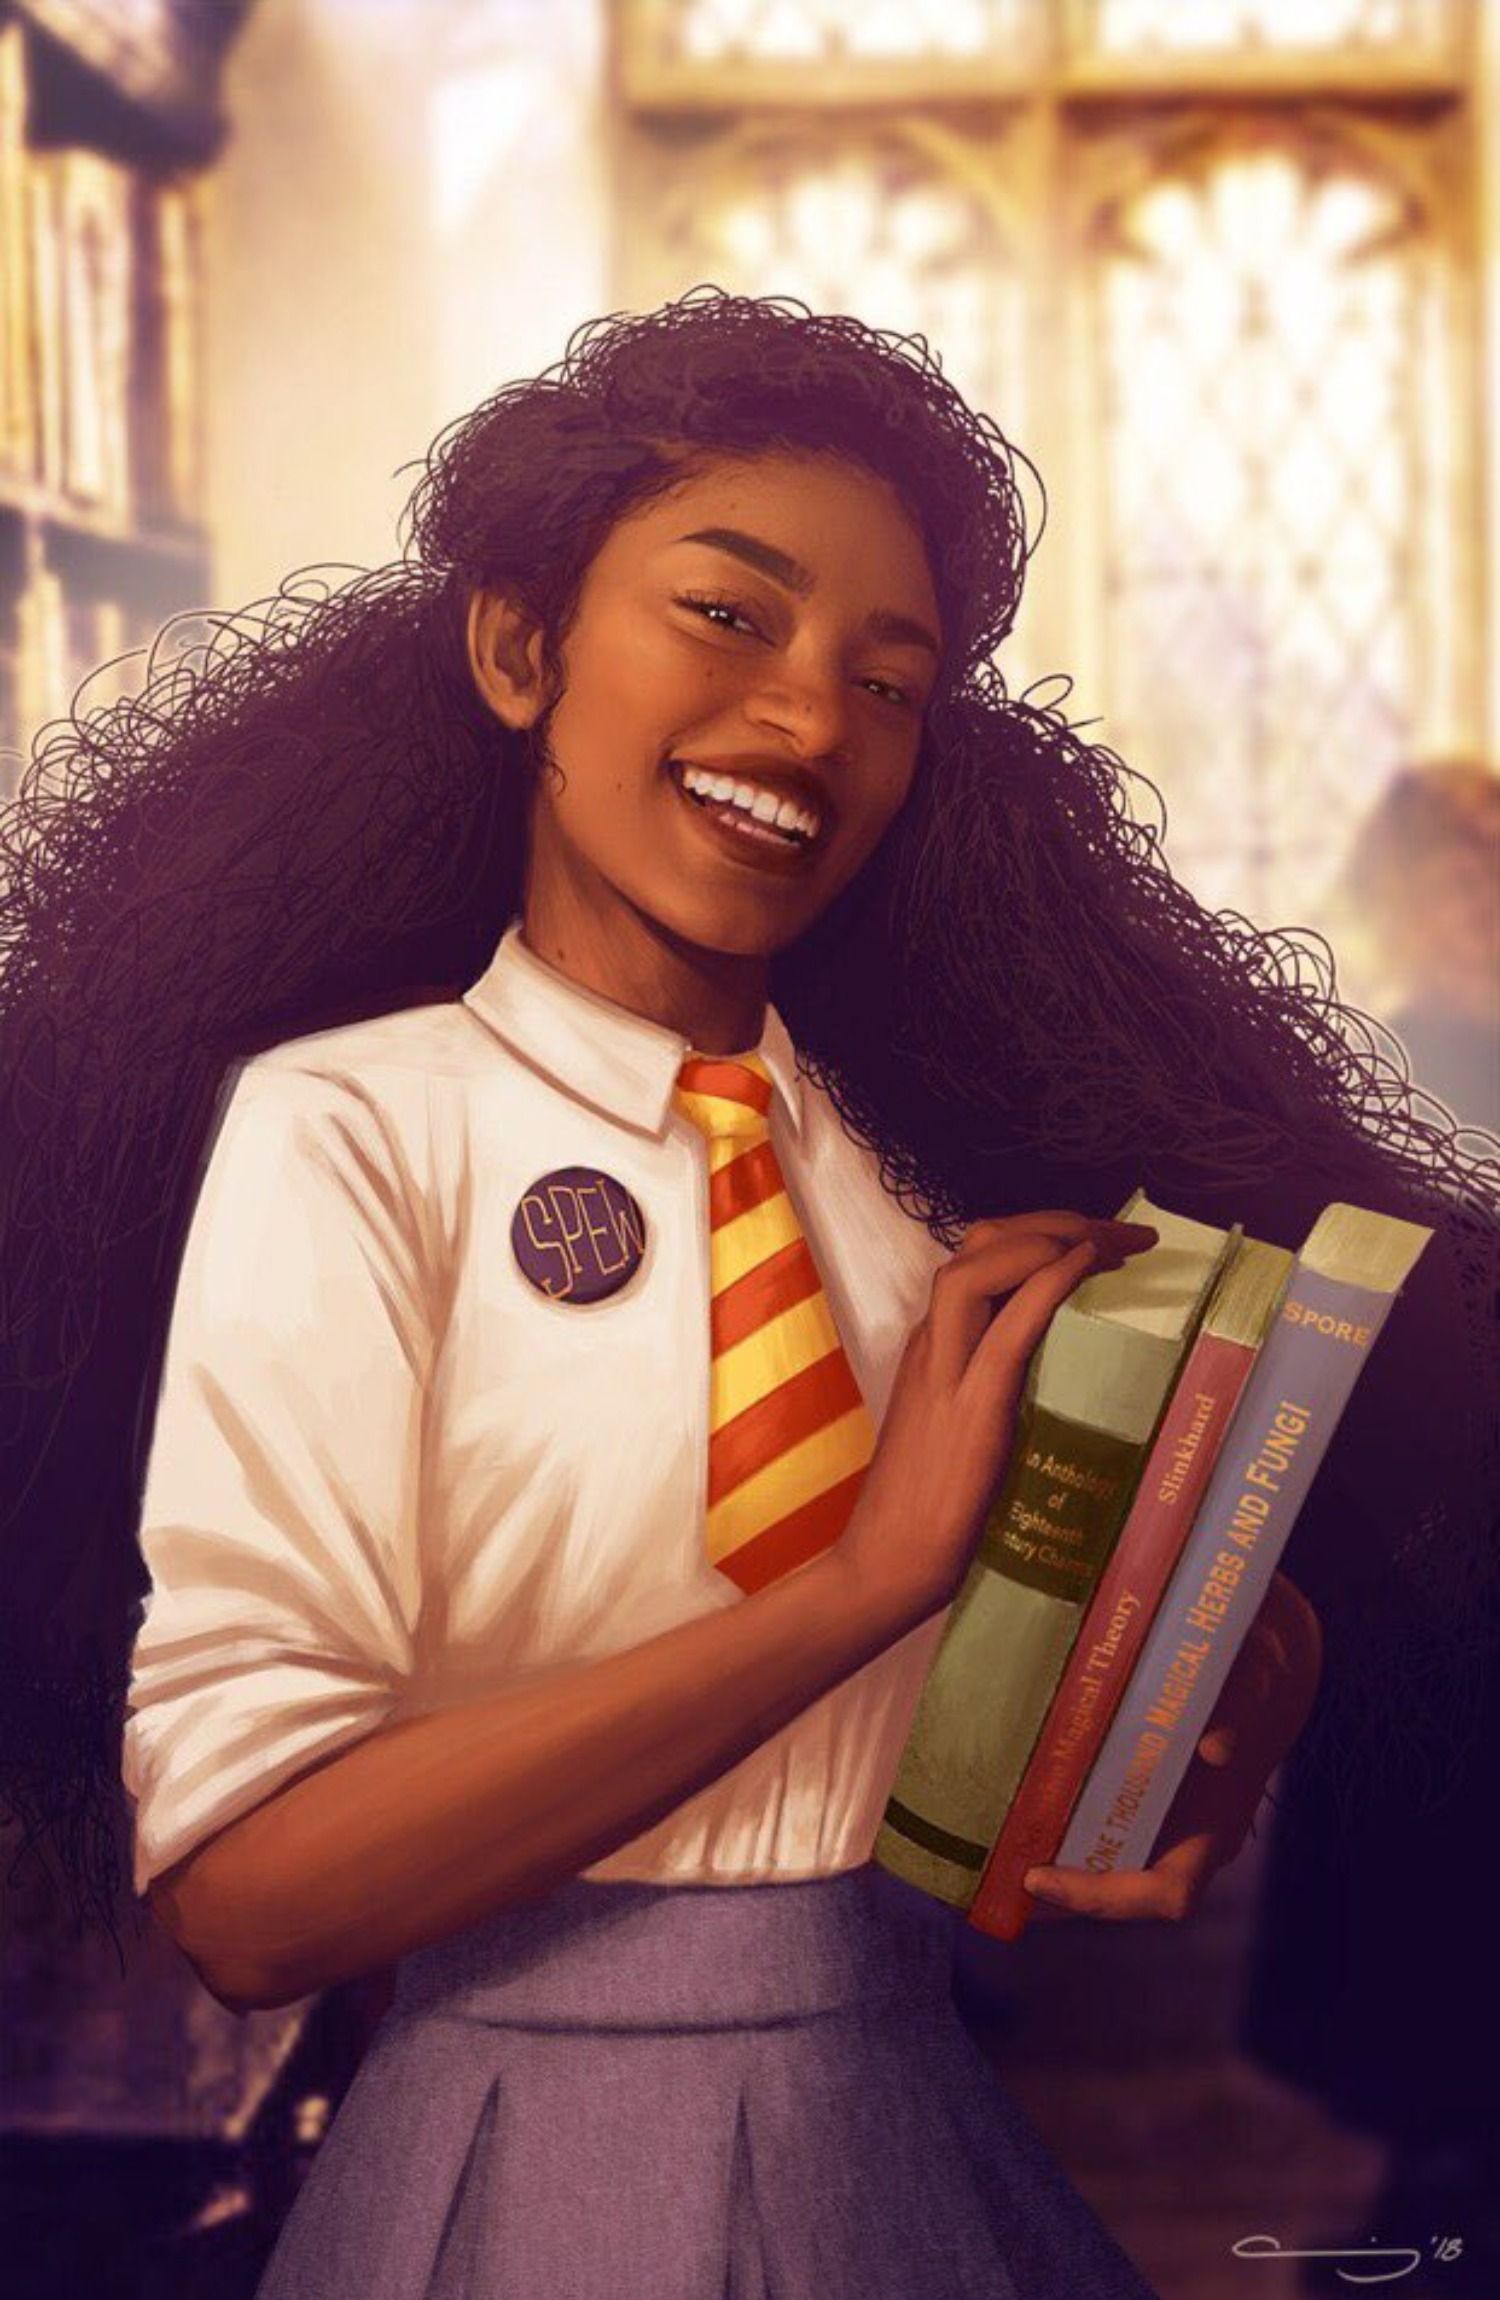 Harry Potter 10 Pieces Of Hermione Granger Fan Art Worthy Of The Brightest Witch Of Her Age